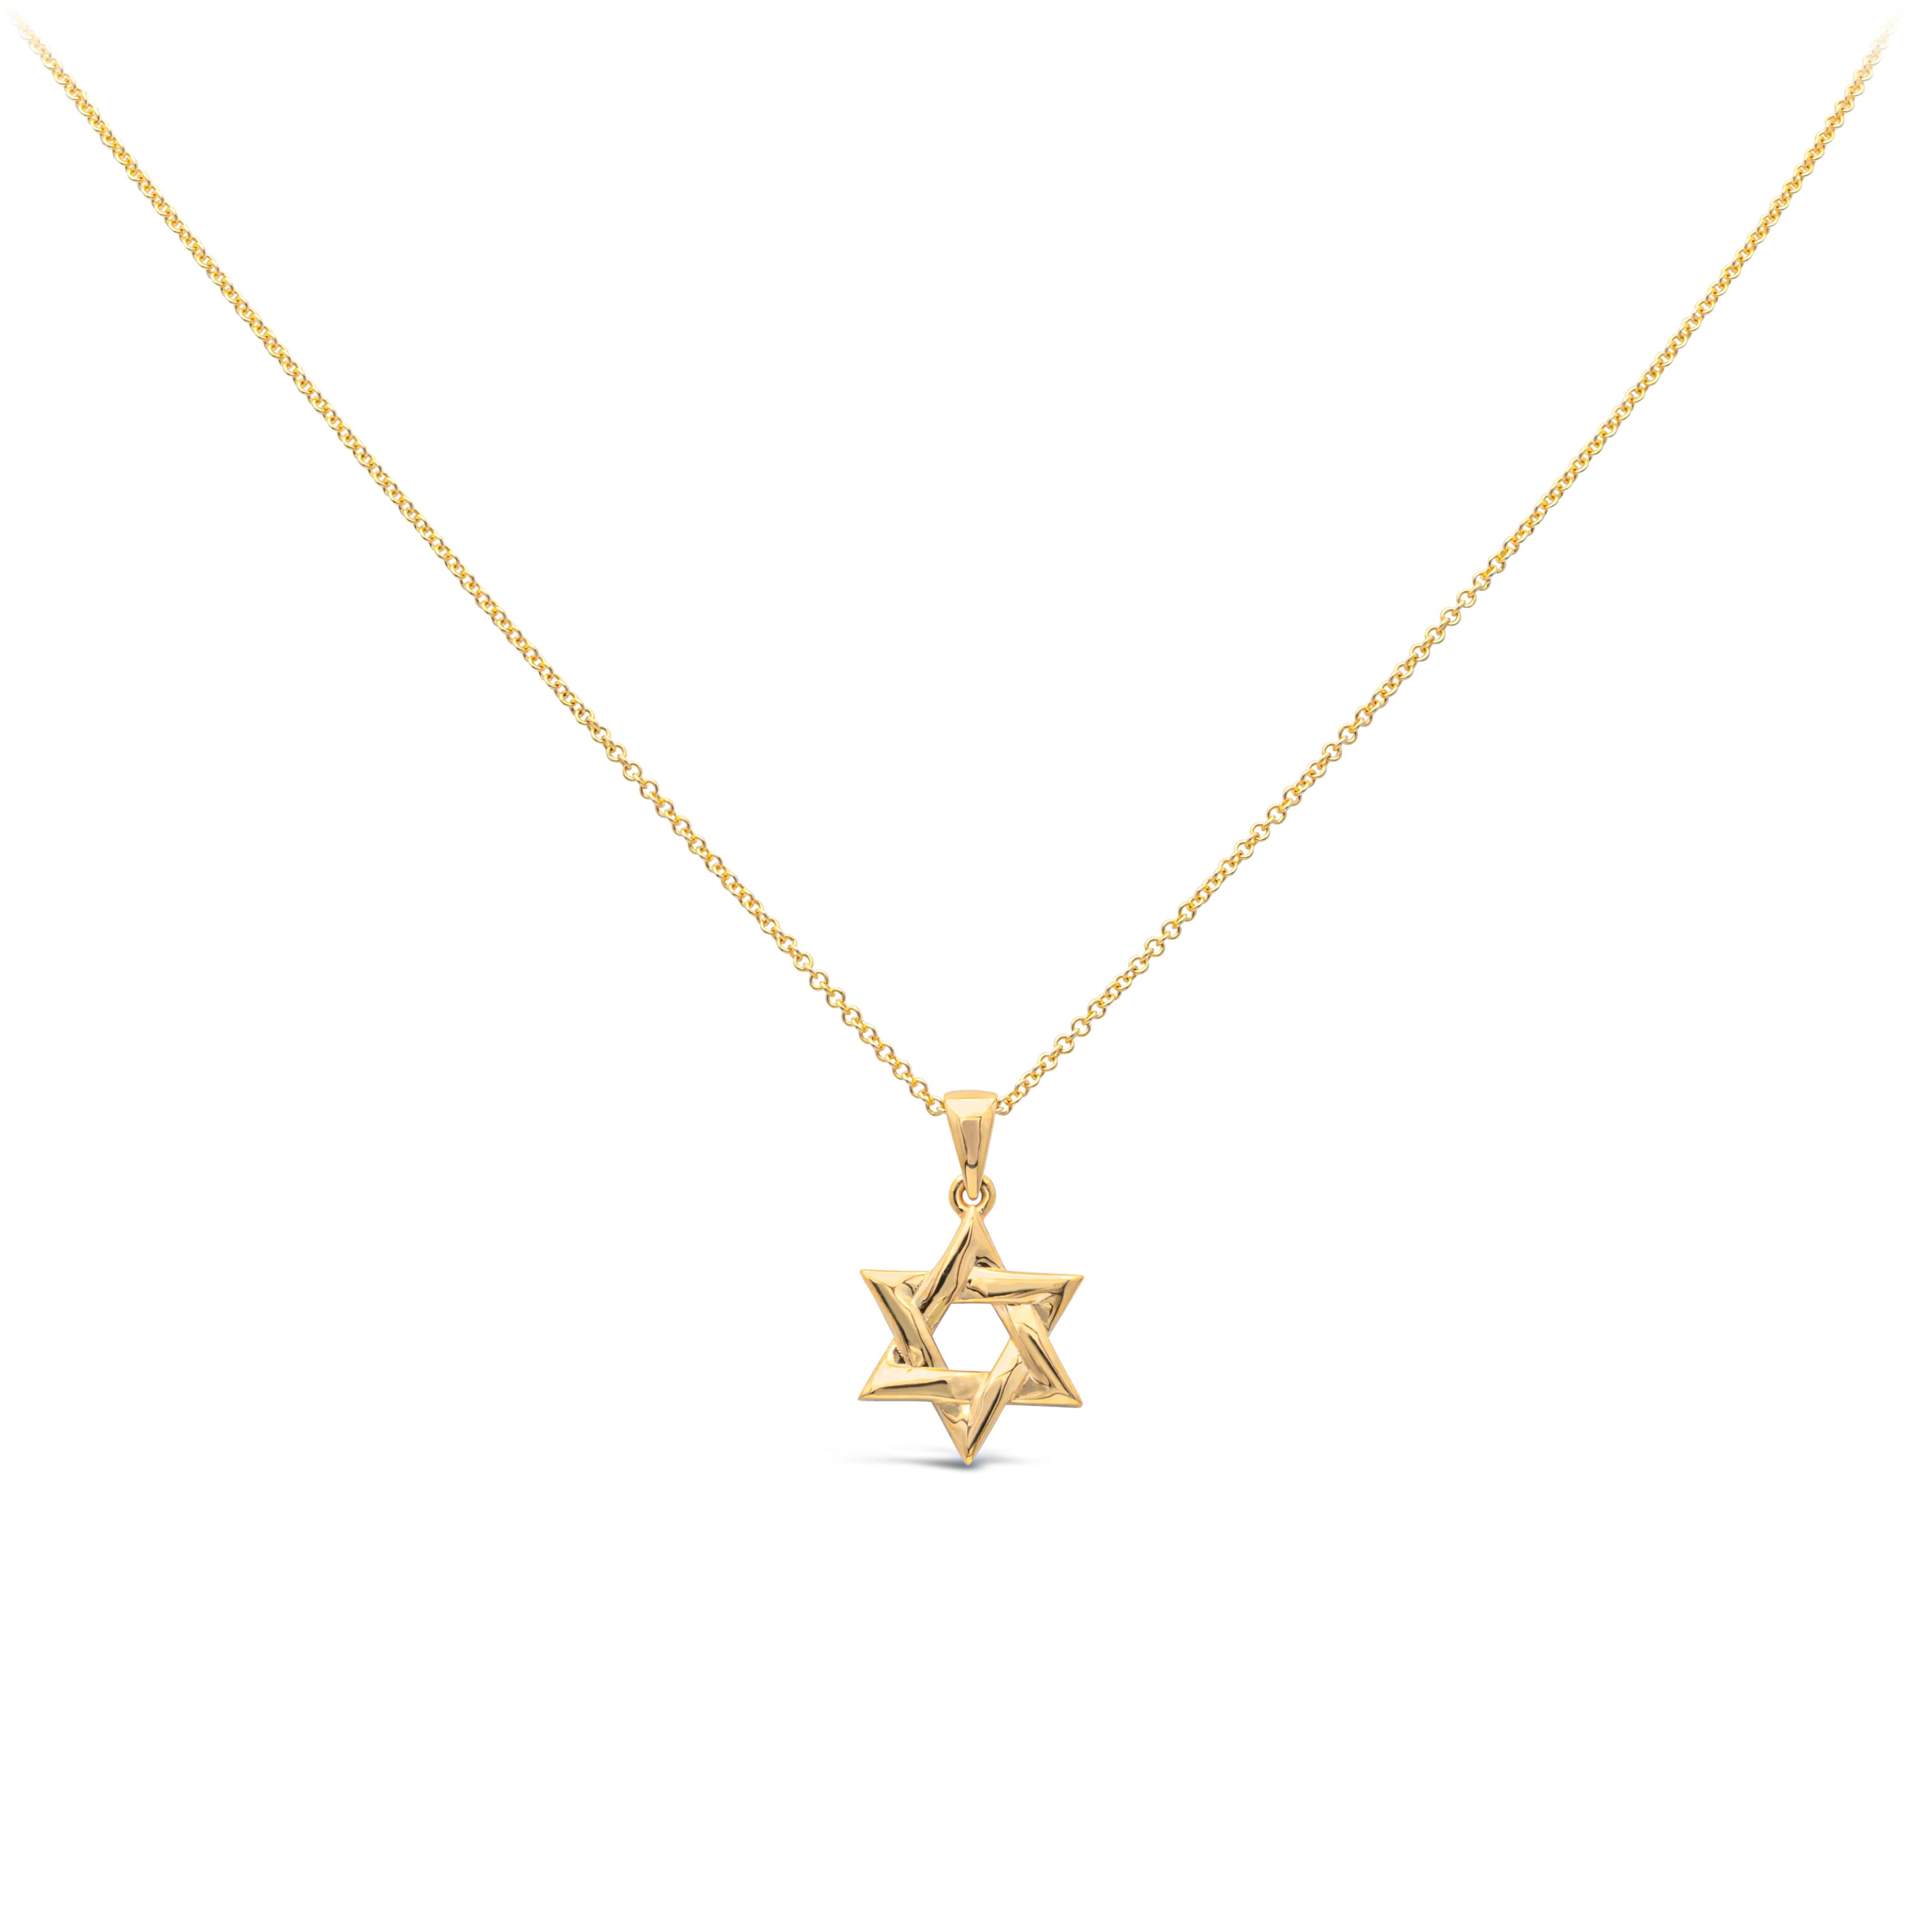 Showcasing an 18k yellow gold traditional religious star of David pendant necklace, suspended on an adjustable yellow gold chain.

Style available in different price ranges. Prices are based on your selection. Please contact us for more information.